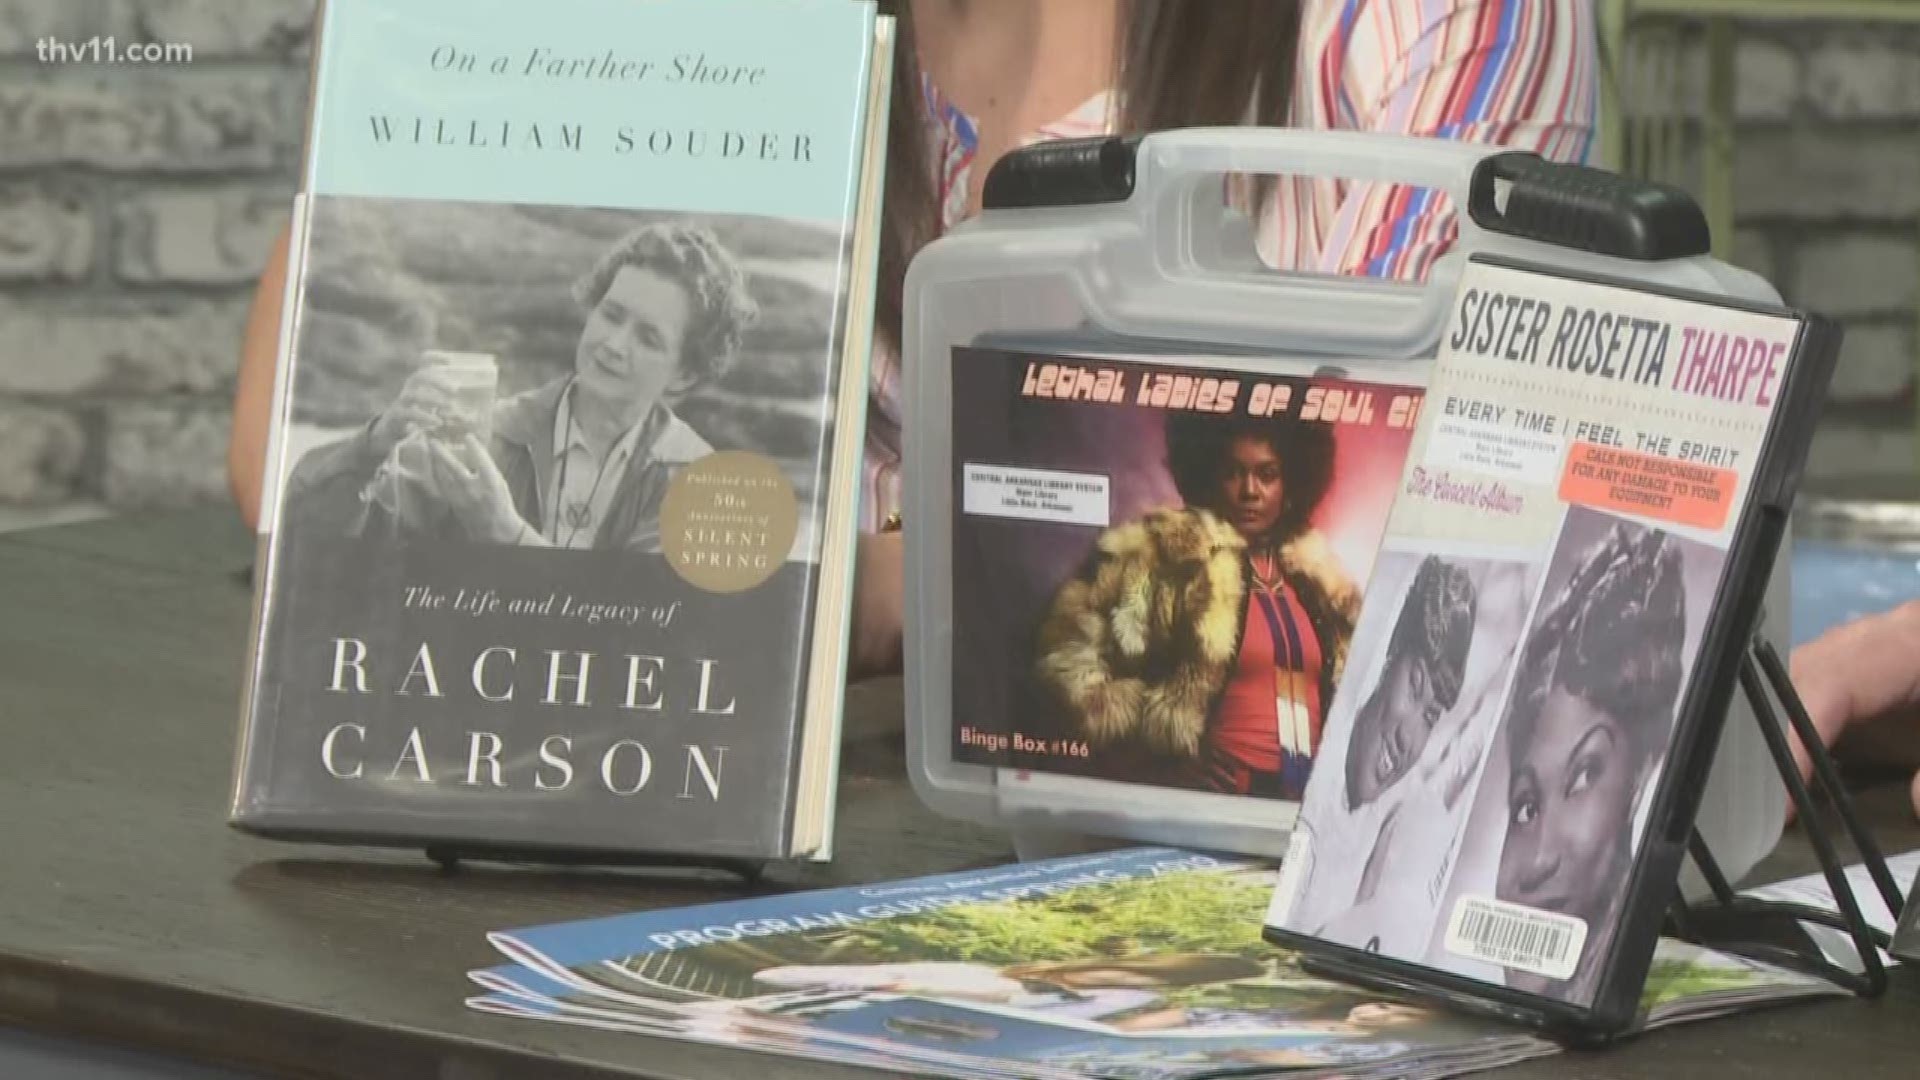 Stewart Fuell with the Central Arkansas Library System shared books, exhibits and DVD's that highlight women in history.